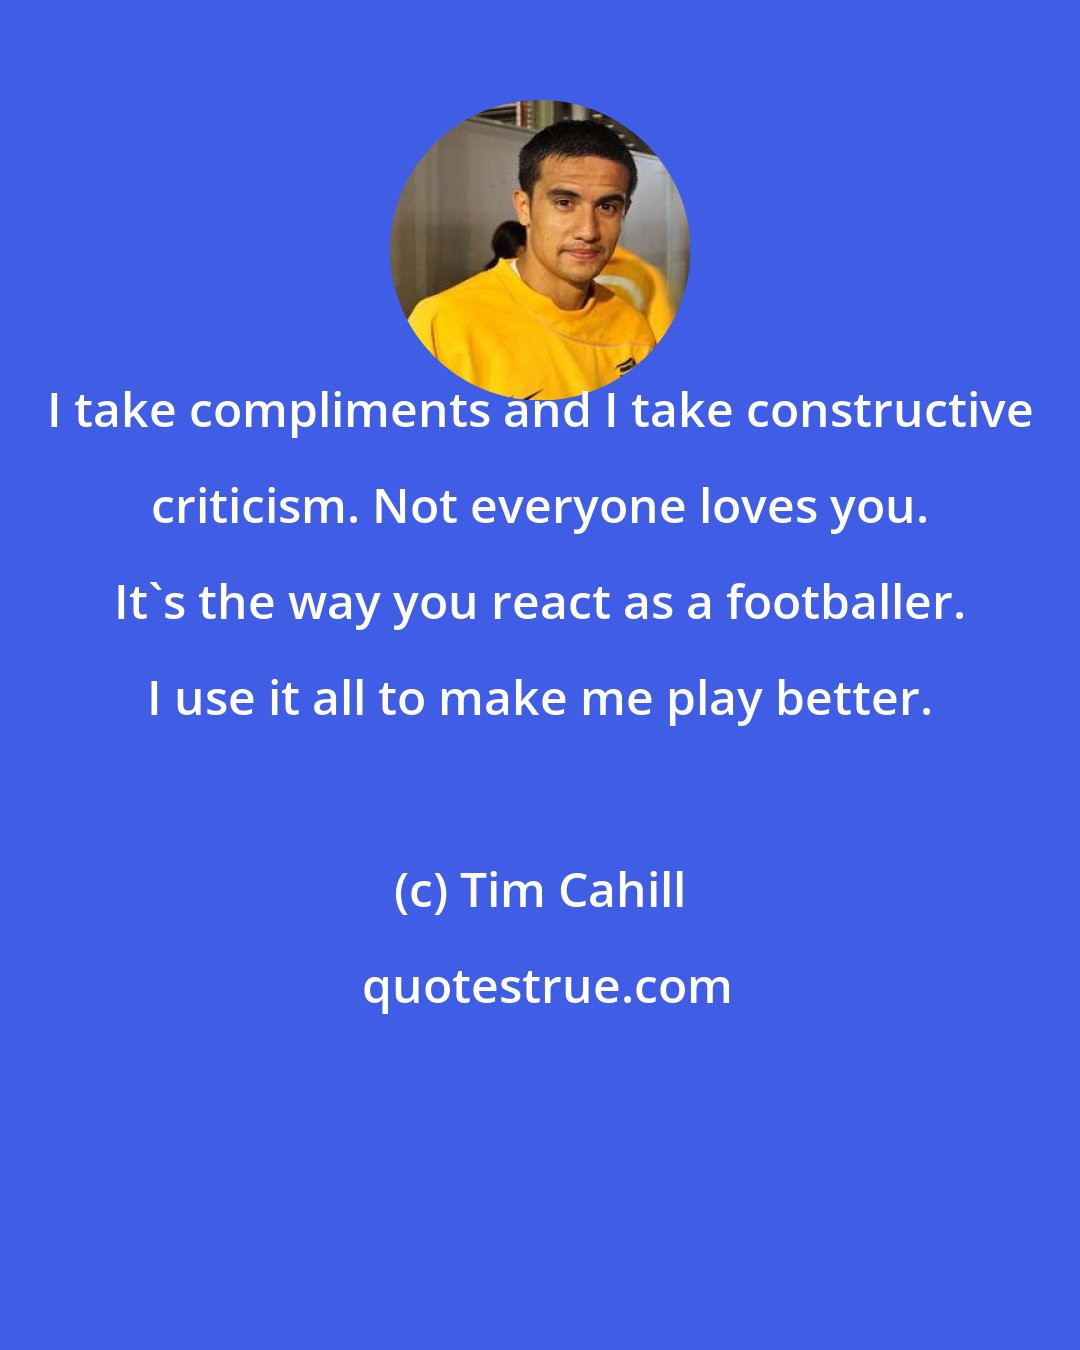 Tim Cahill: I take compliments and I take constructive criticism. Not everyone loves you. It's the way you react as a footballer. I use it all to make me play better.